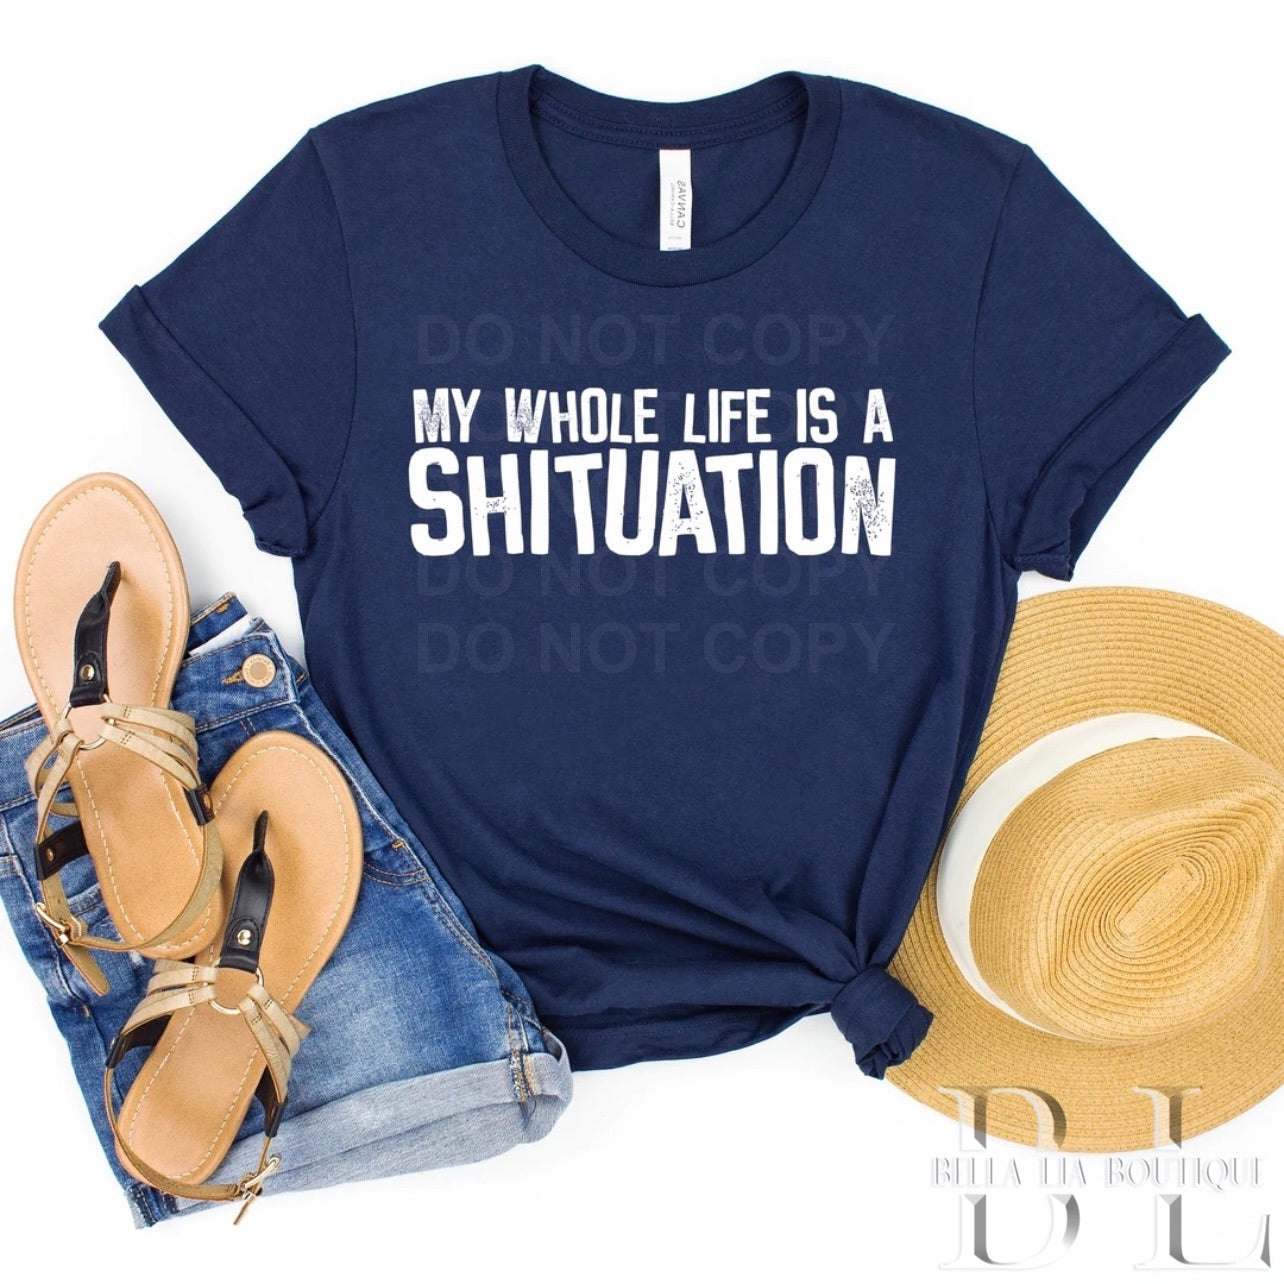 My Whole Life is a Shituation Graphic Tee or Sweatshirt - Bella Lia Boutique